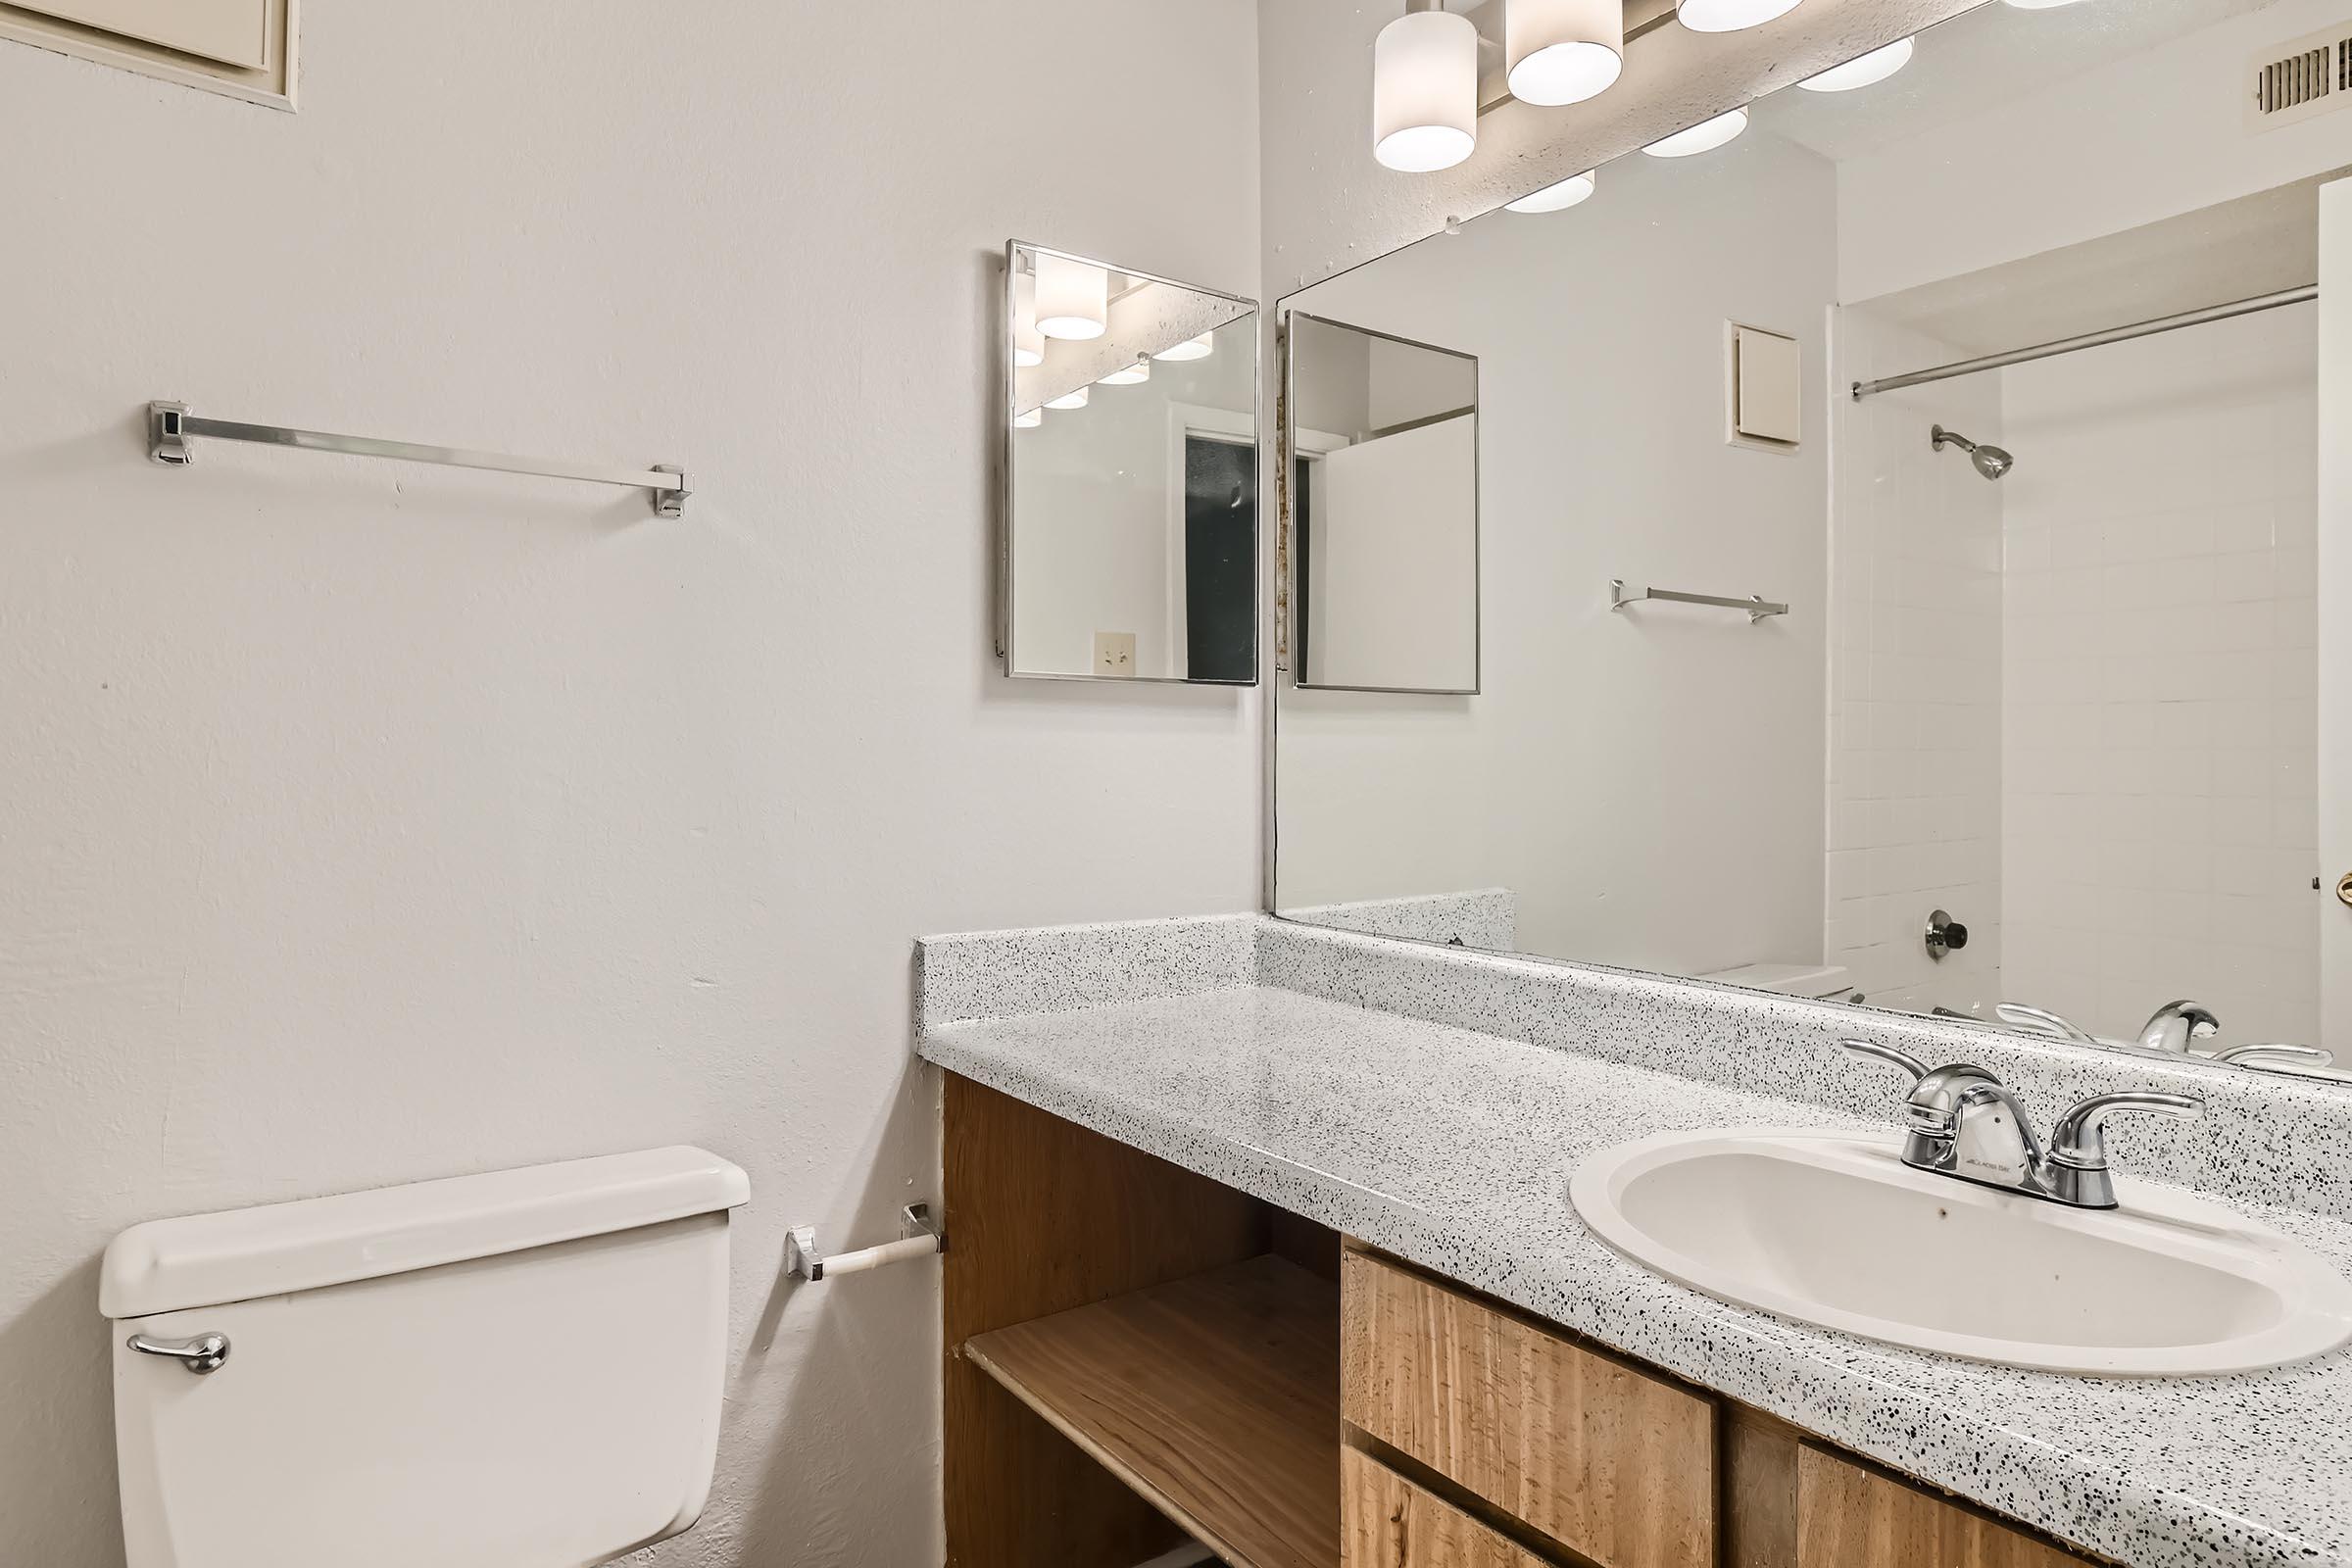 An apartment bathroom with a large vanity and mirror at Rise North Arlington.